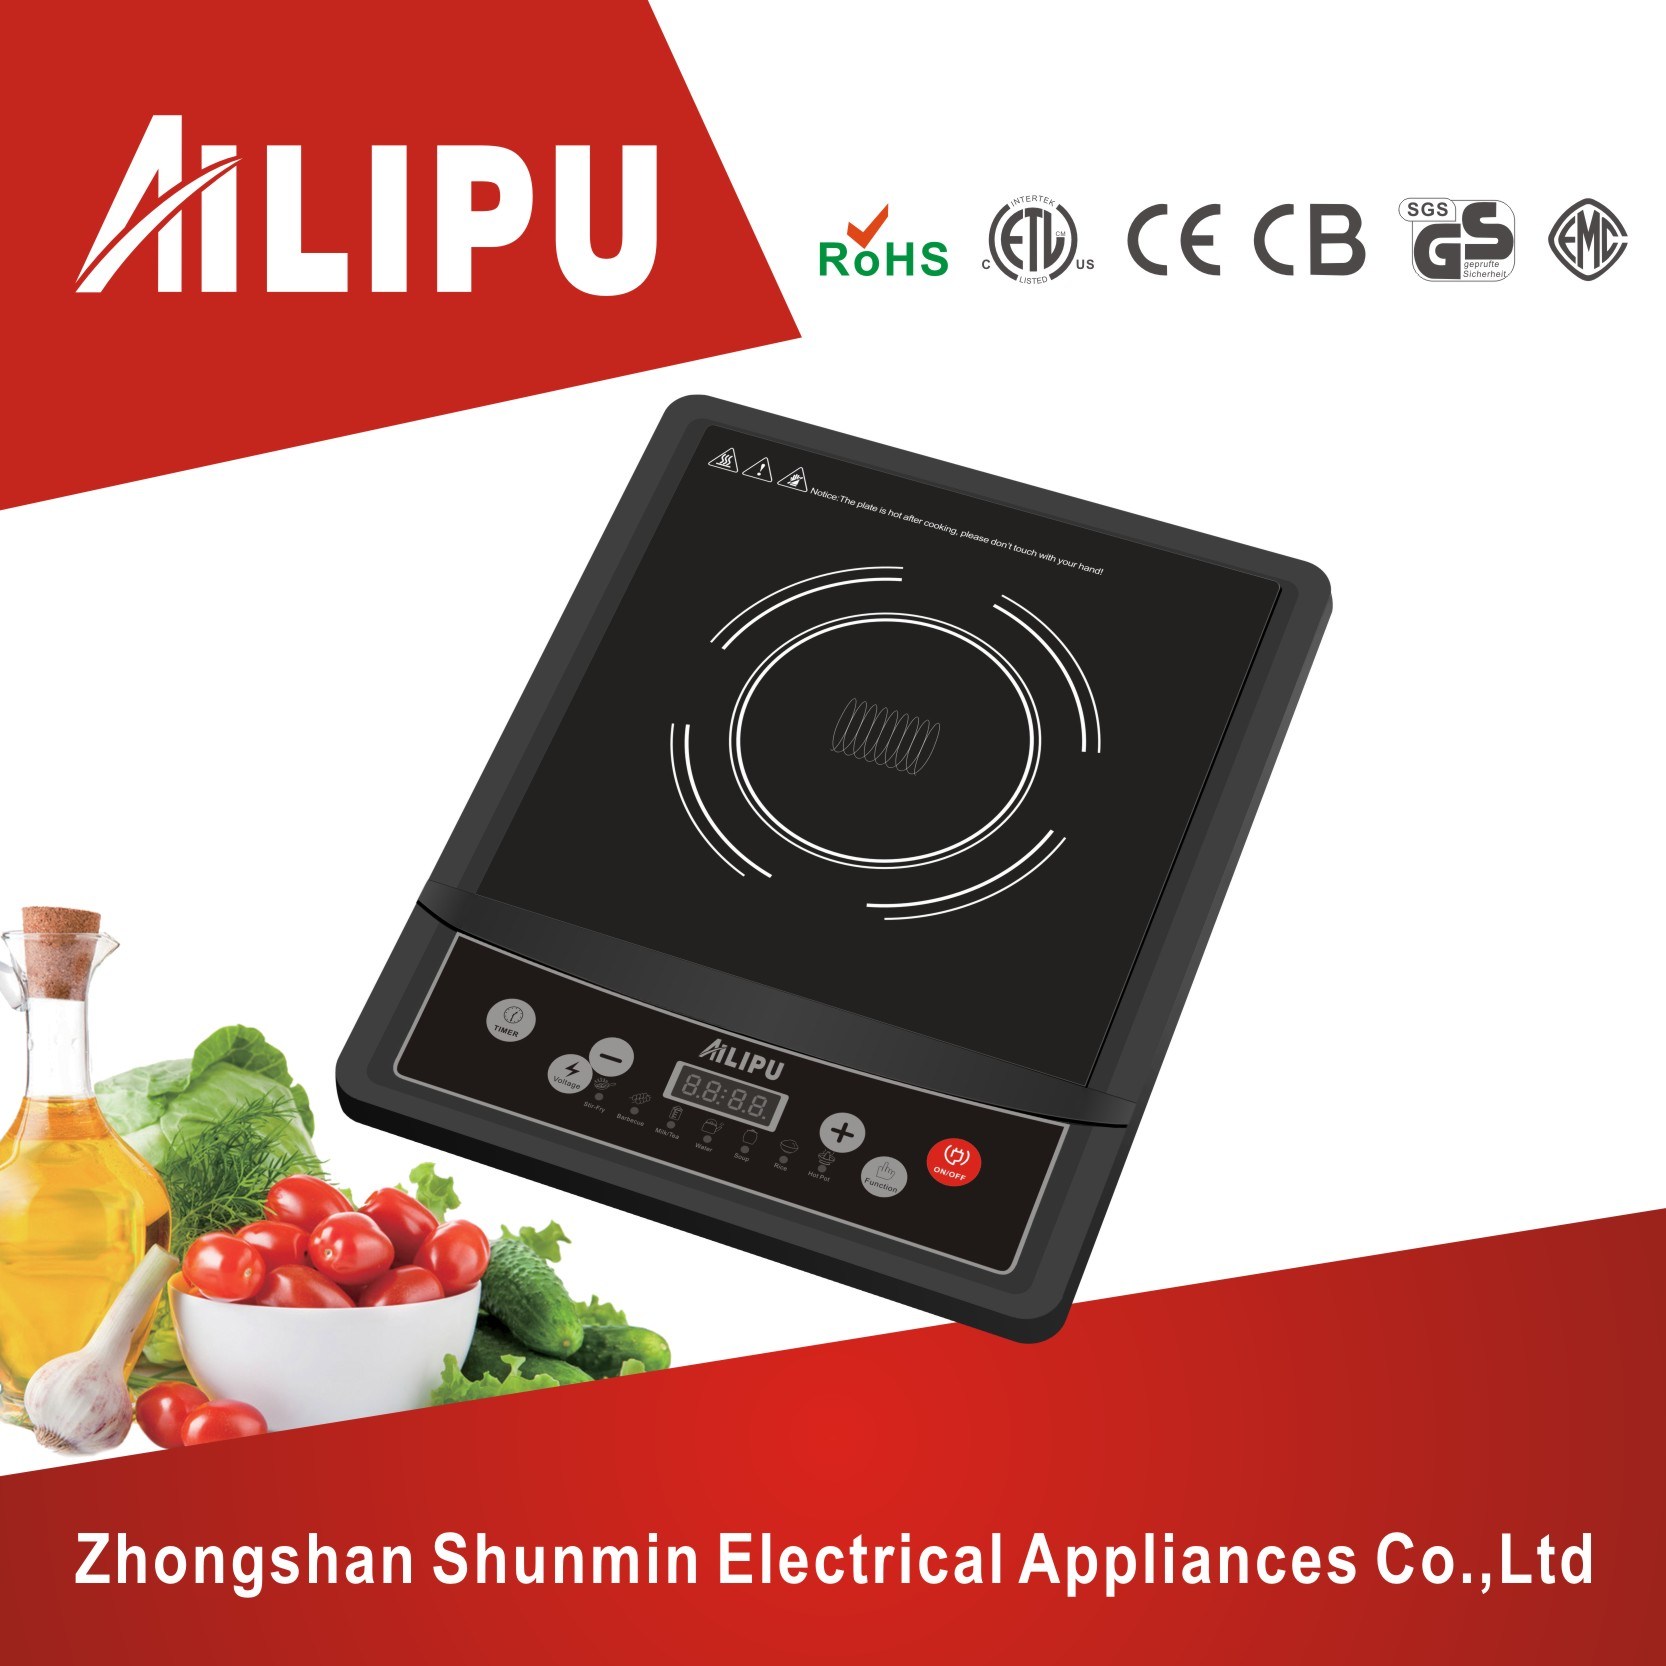 CE, CB, RoHS, EMC, LVD, Saso, ETL, UL Certification and Plastic Housing High Efficiency Impex Induction Cooker/Induction Stove Oven